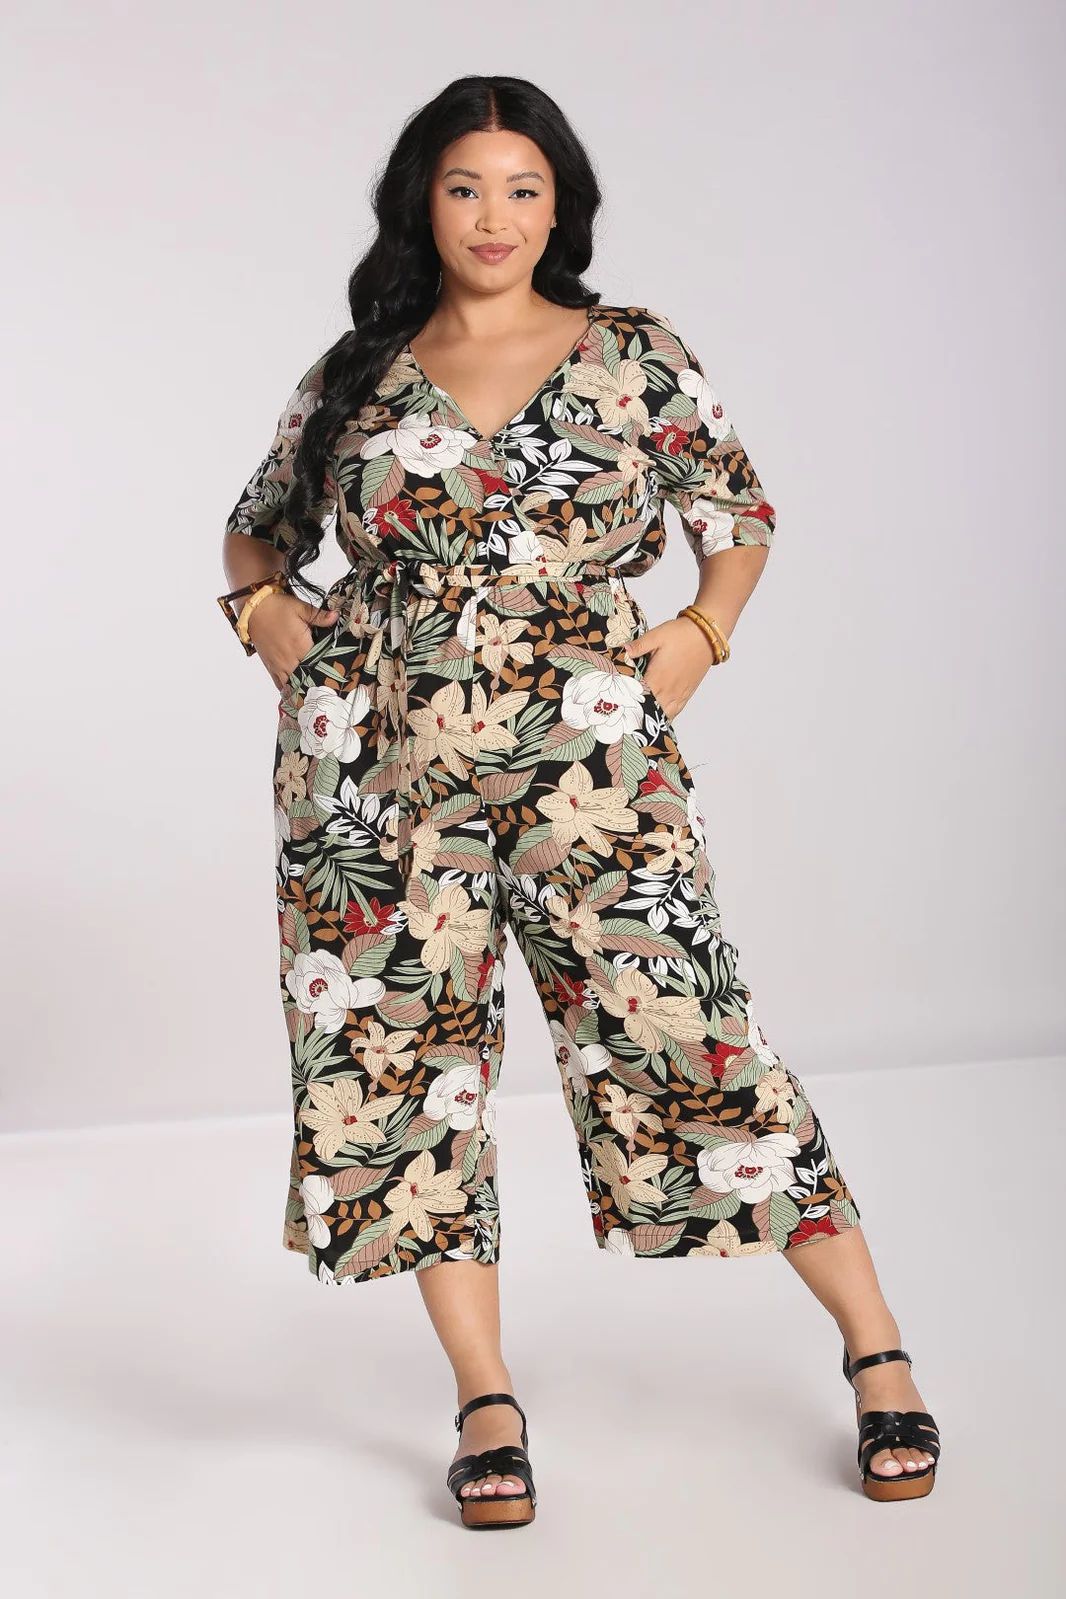 PS50251bbbb_combinaison-jumpsuit-hell-bunny-pinup-50-s-retro-adelaida